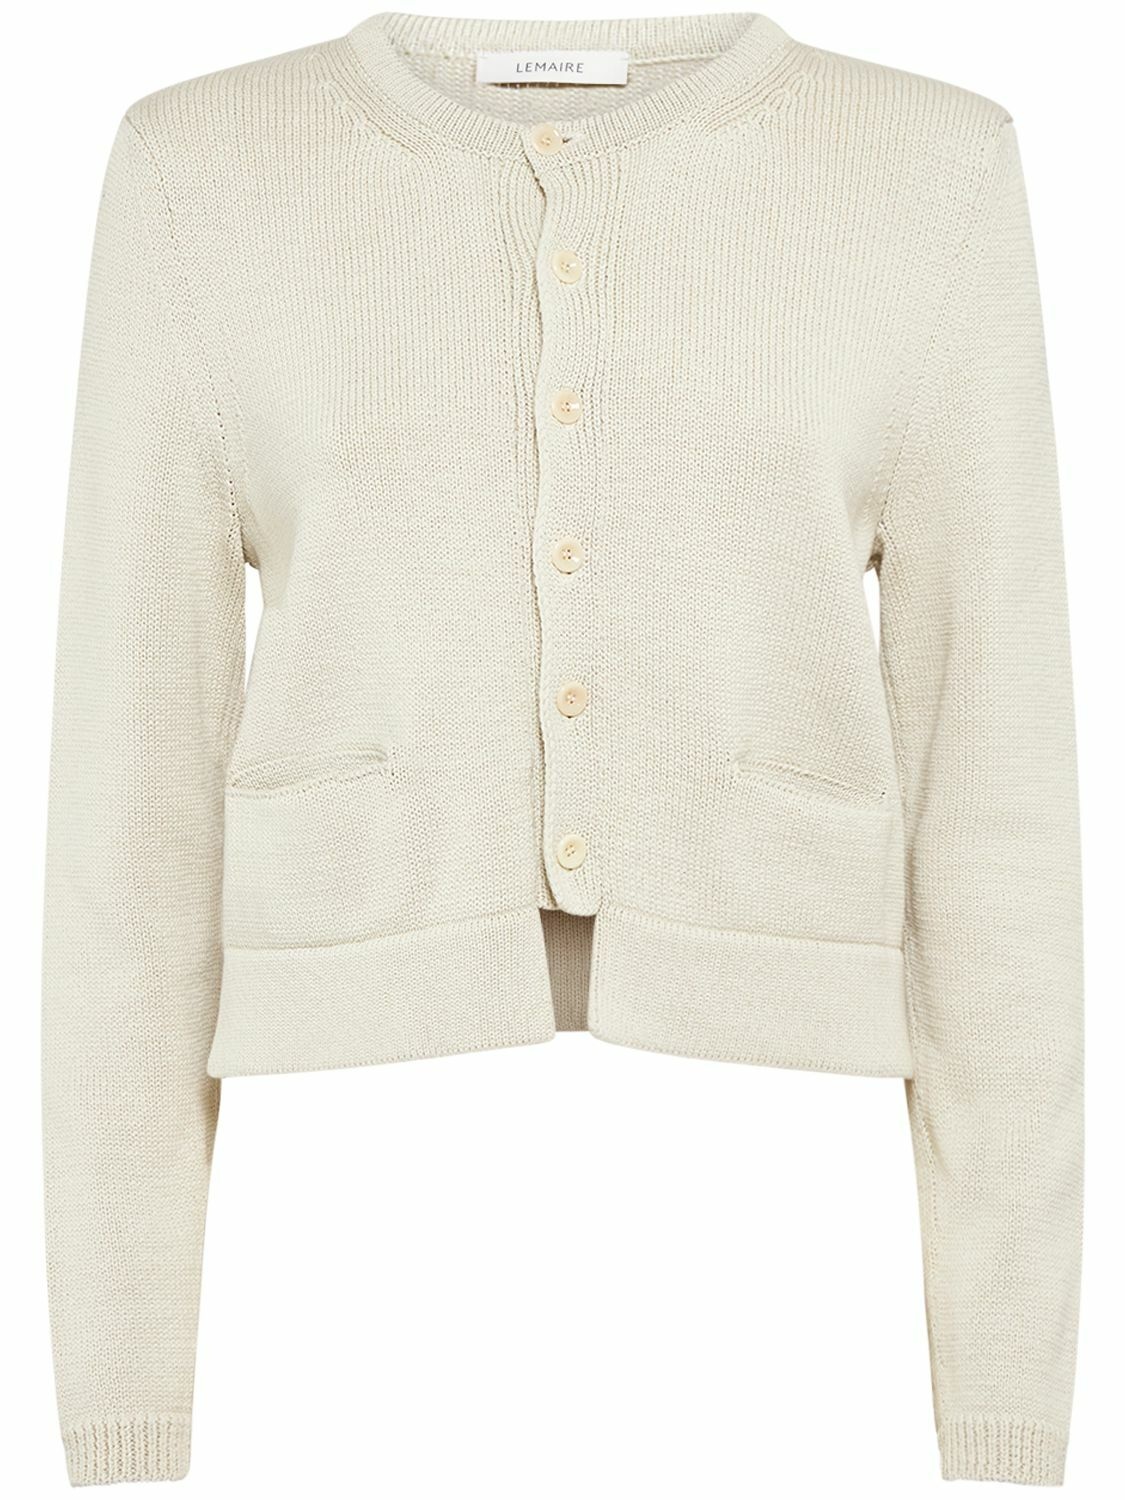 Photo: LEMAIRE - Cropped Cotton Cardigan